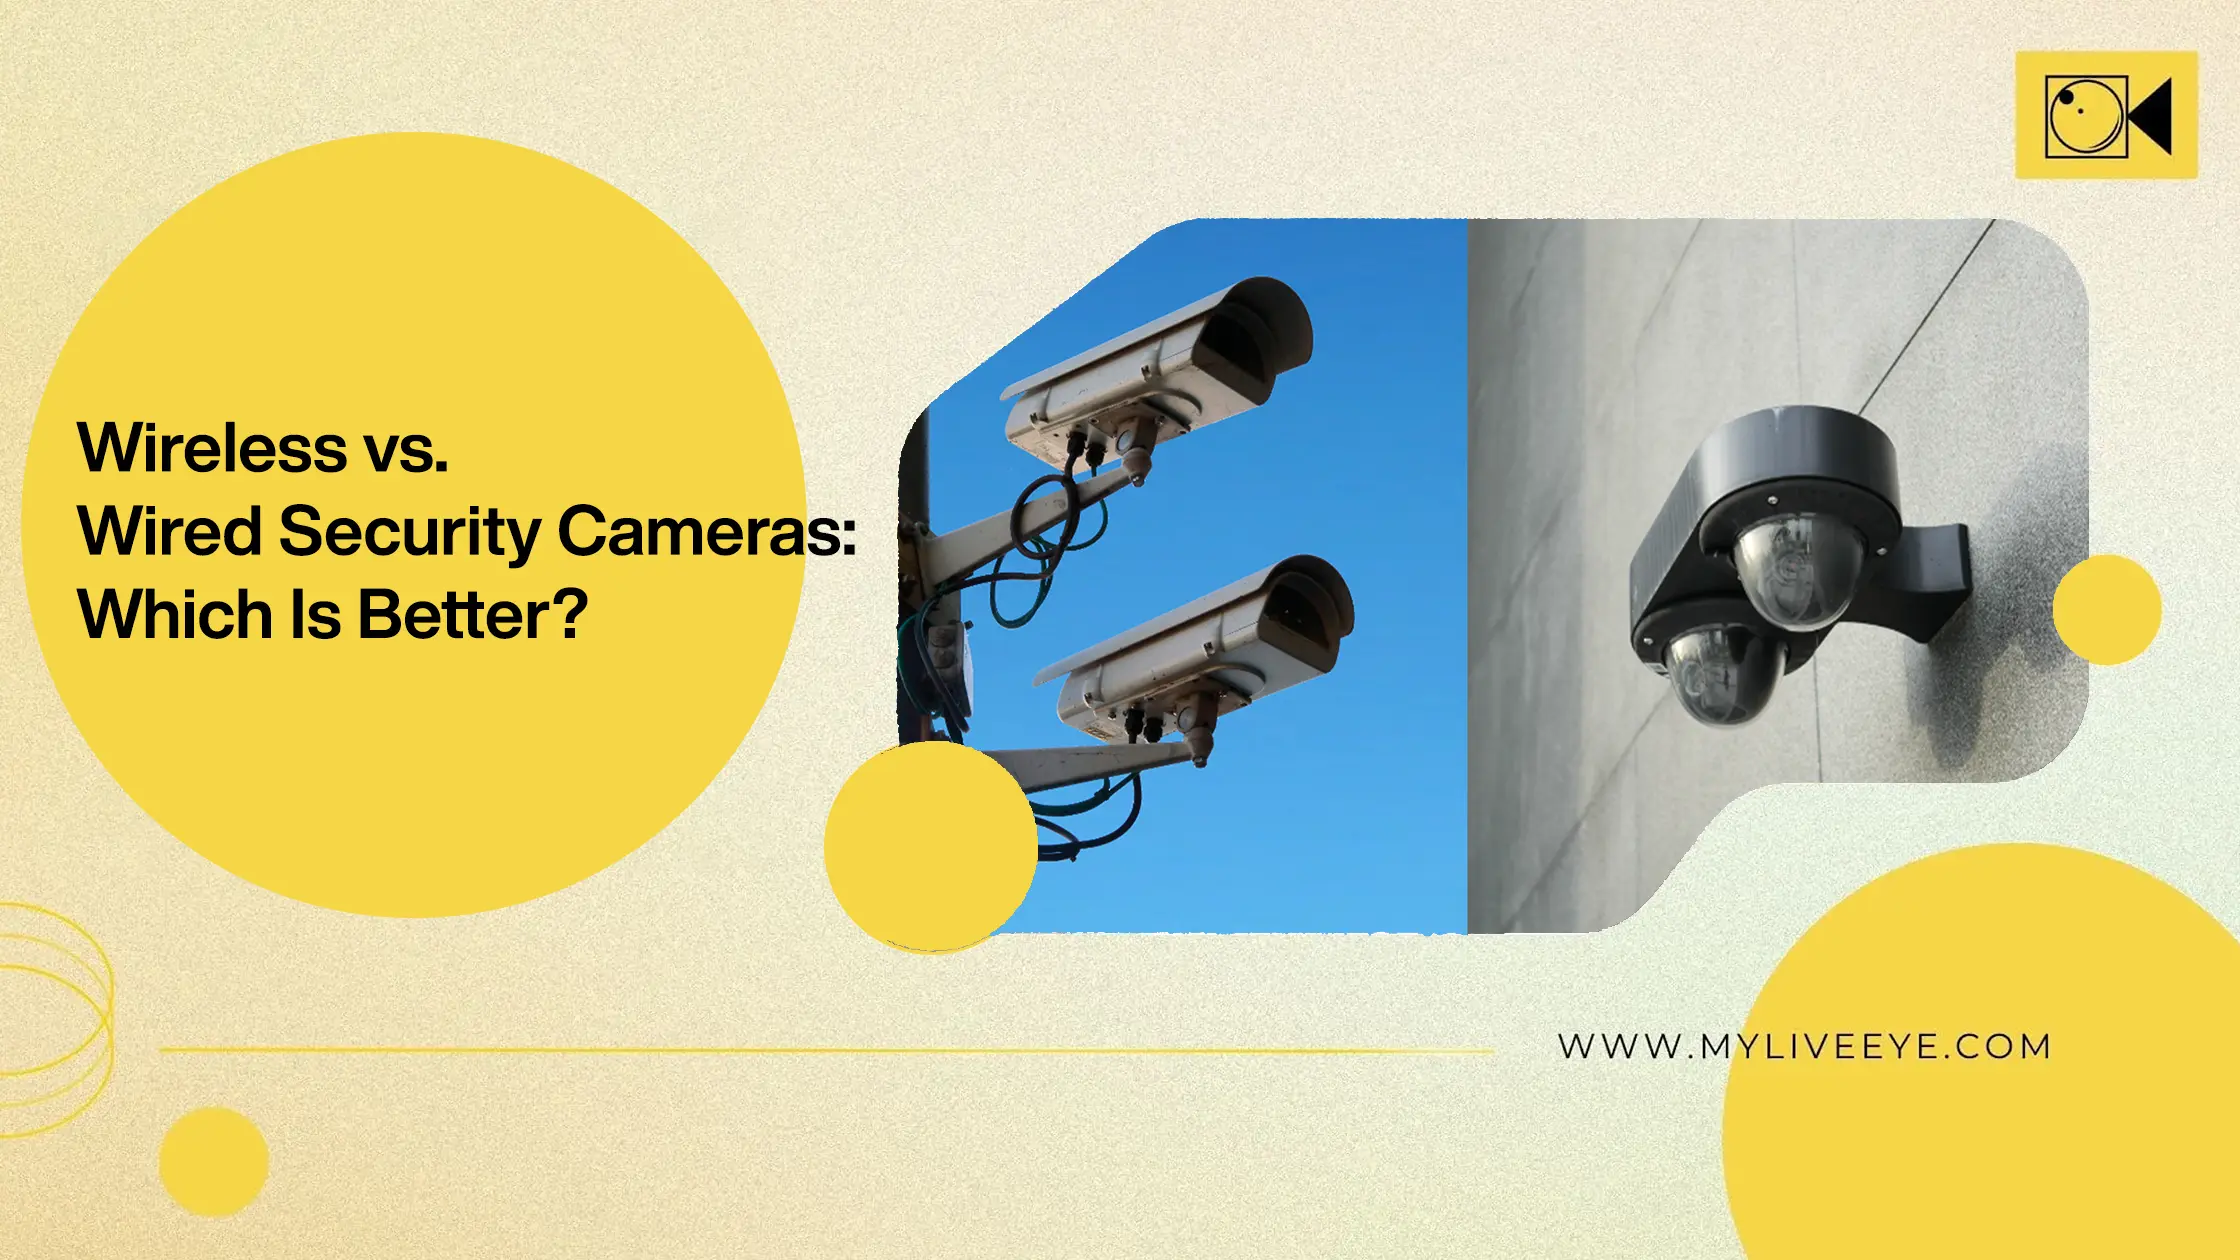 Wireless vs. Wired Security Cameras: Which Is Better?